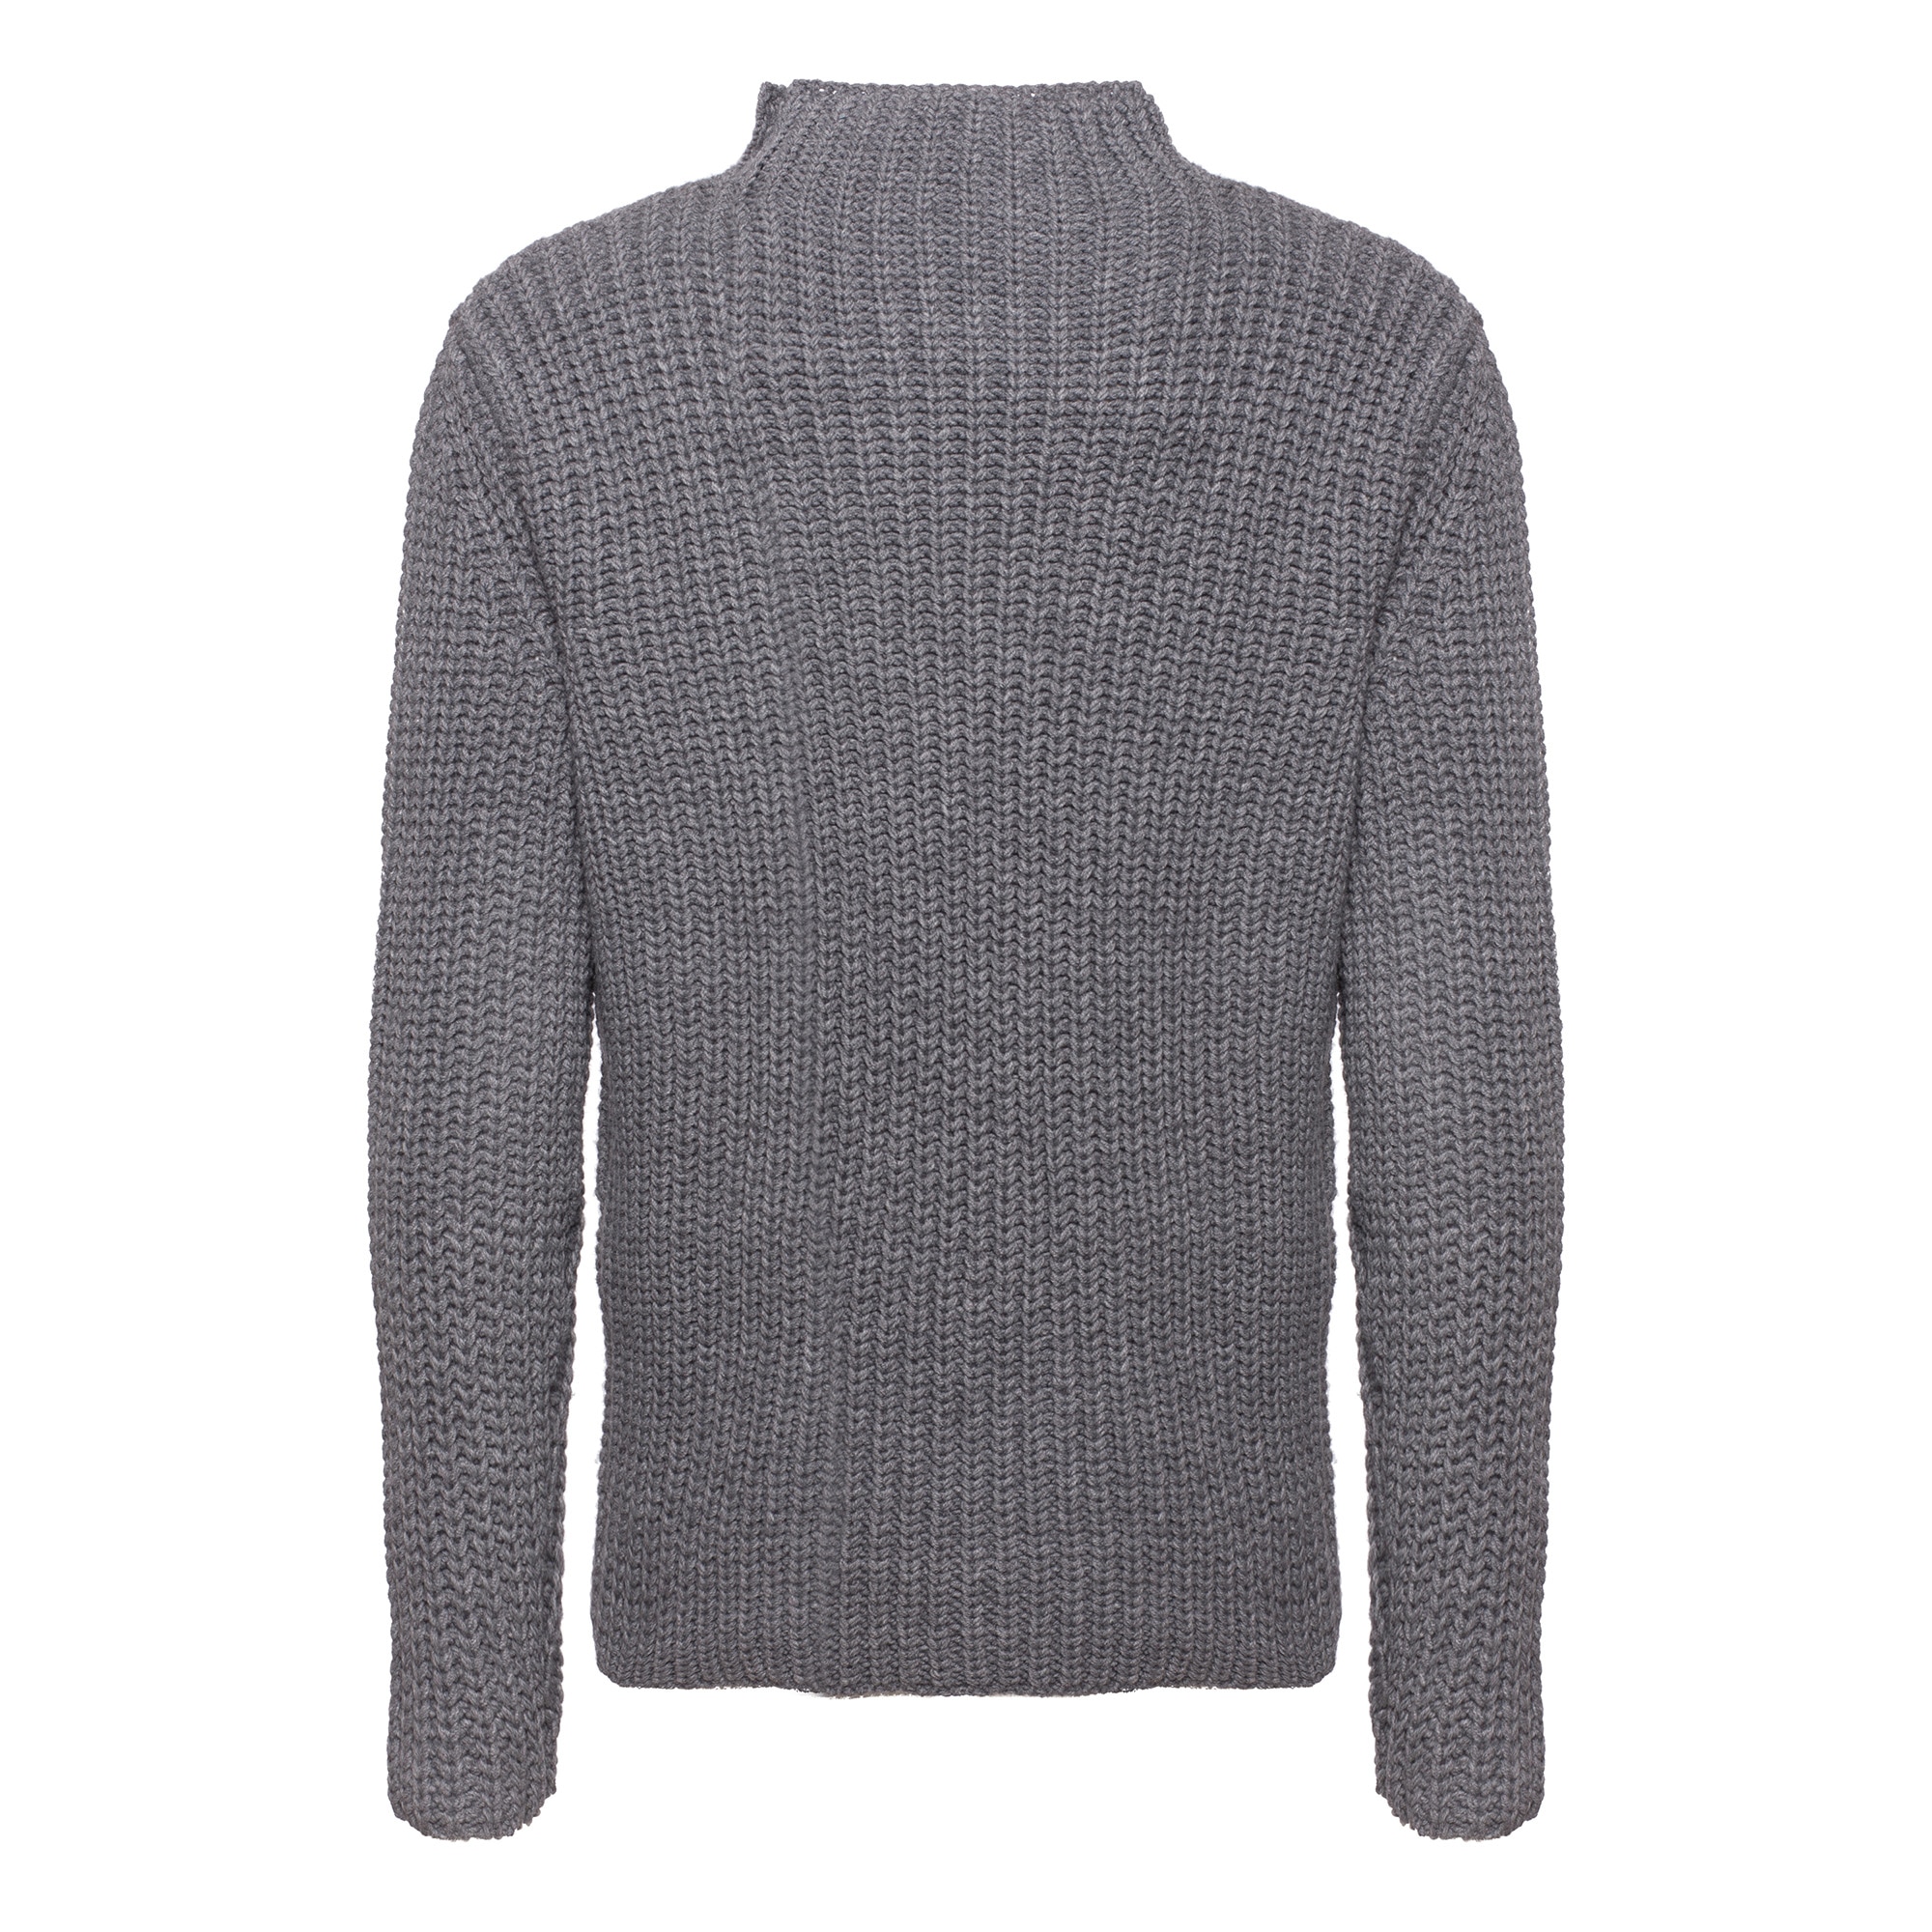 MG HISTORICAL SWEATER for motorcycles 606745m | Guzzi motorcycles